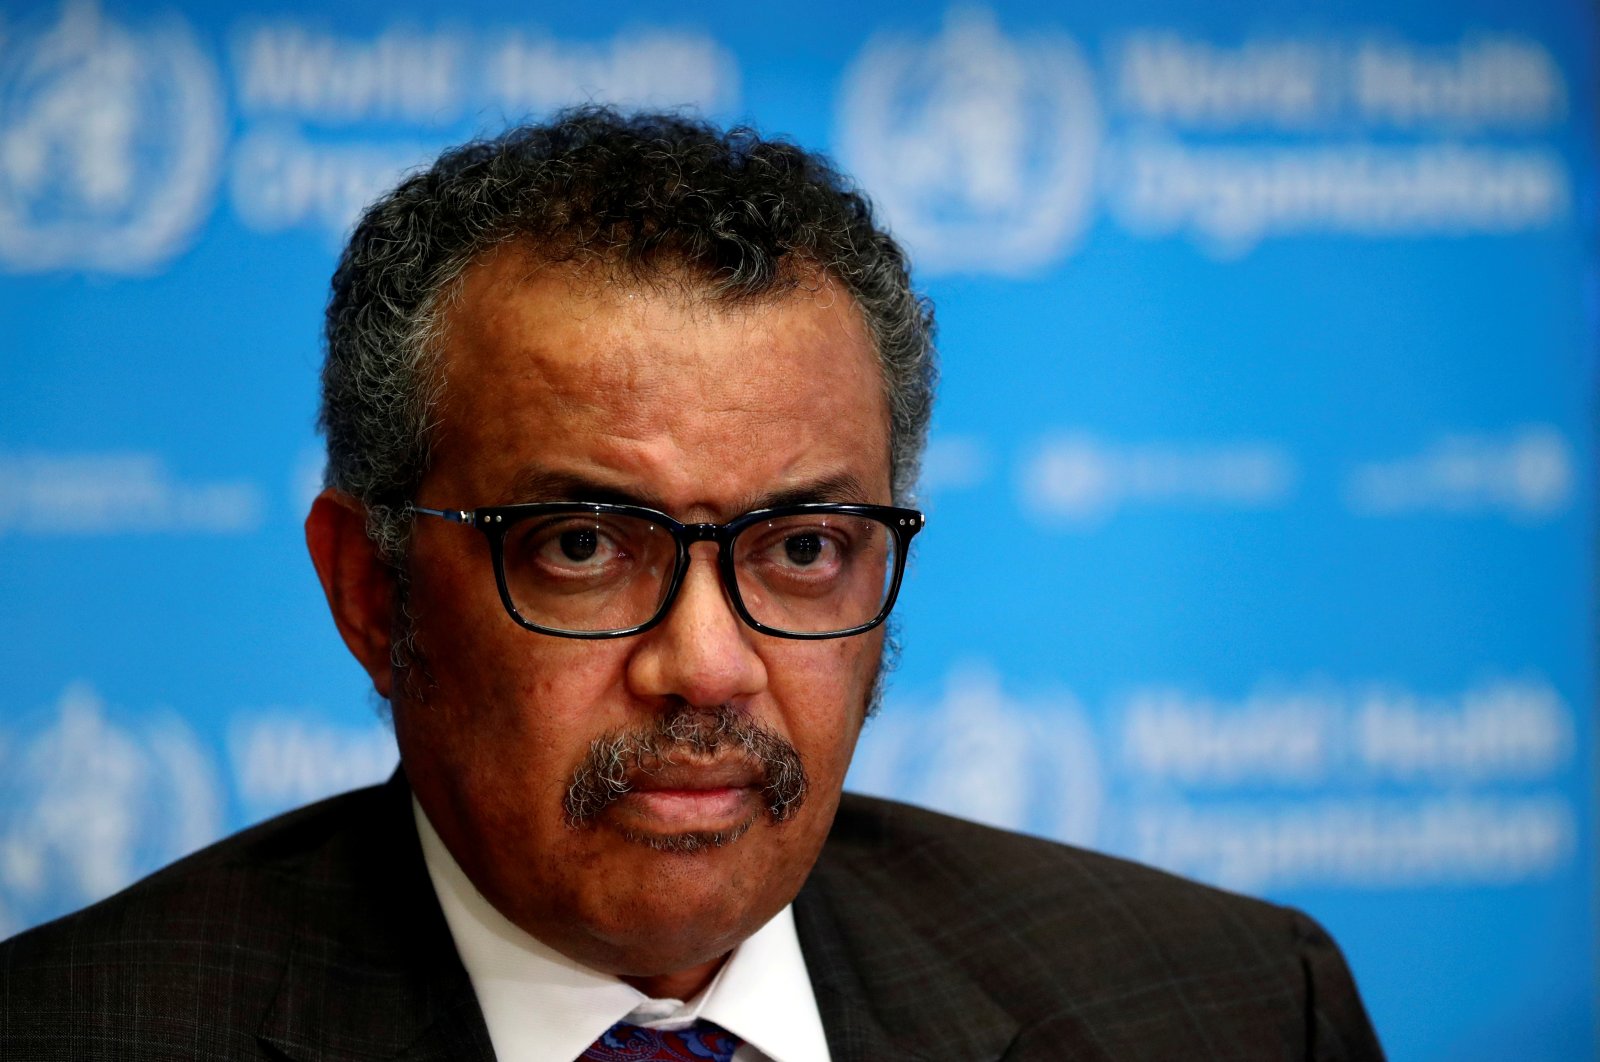 The director-general of the World Health Organization (WHO), Tedros Adhanom Ghebreyesus, attends a news conference on the situation of the coronavirus, Geneva, Feb. 28, 2020. (Reuters Photo)